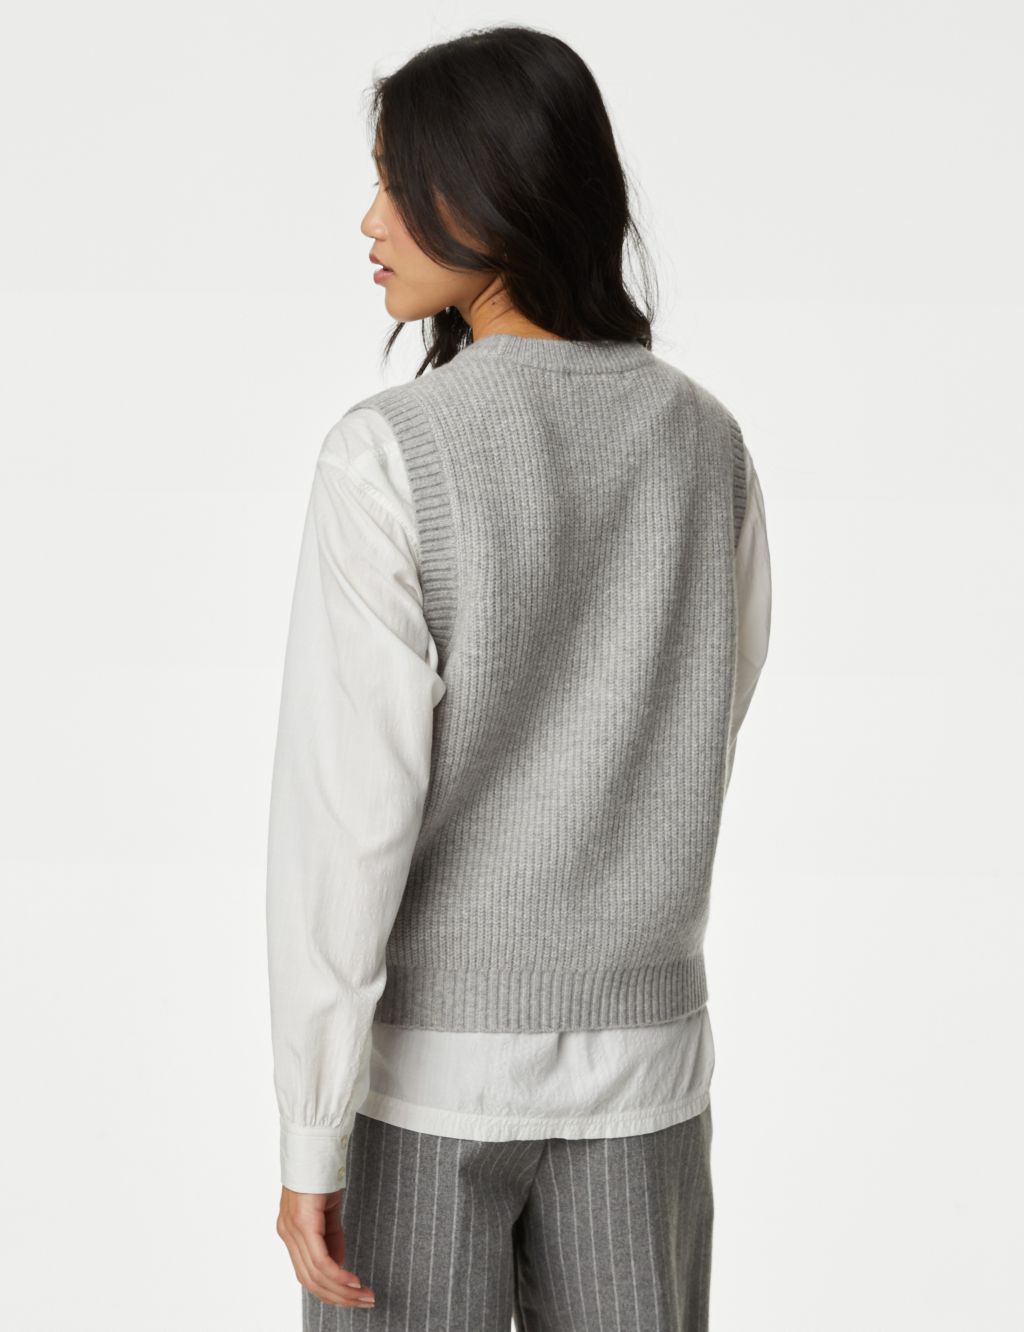 Air-Yarn Ribbed Crew Neck Knitted Vest image 5